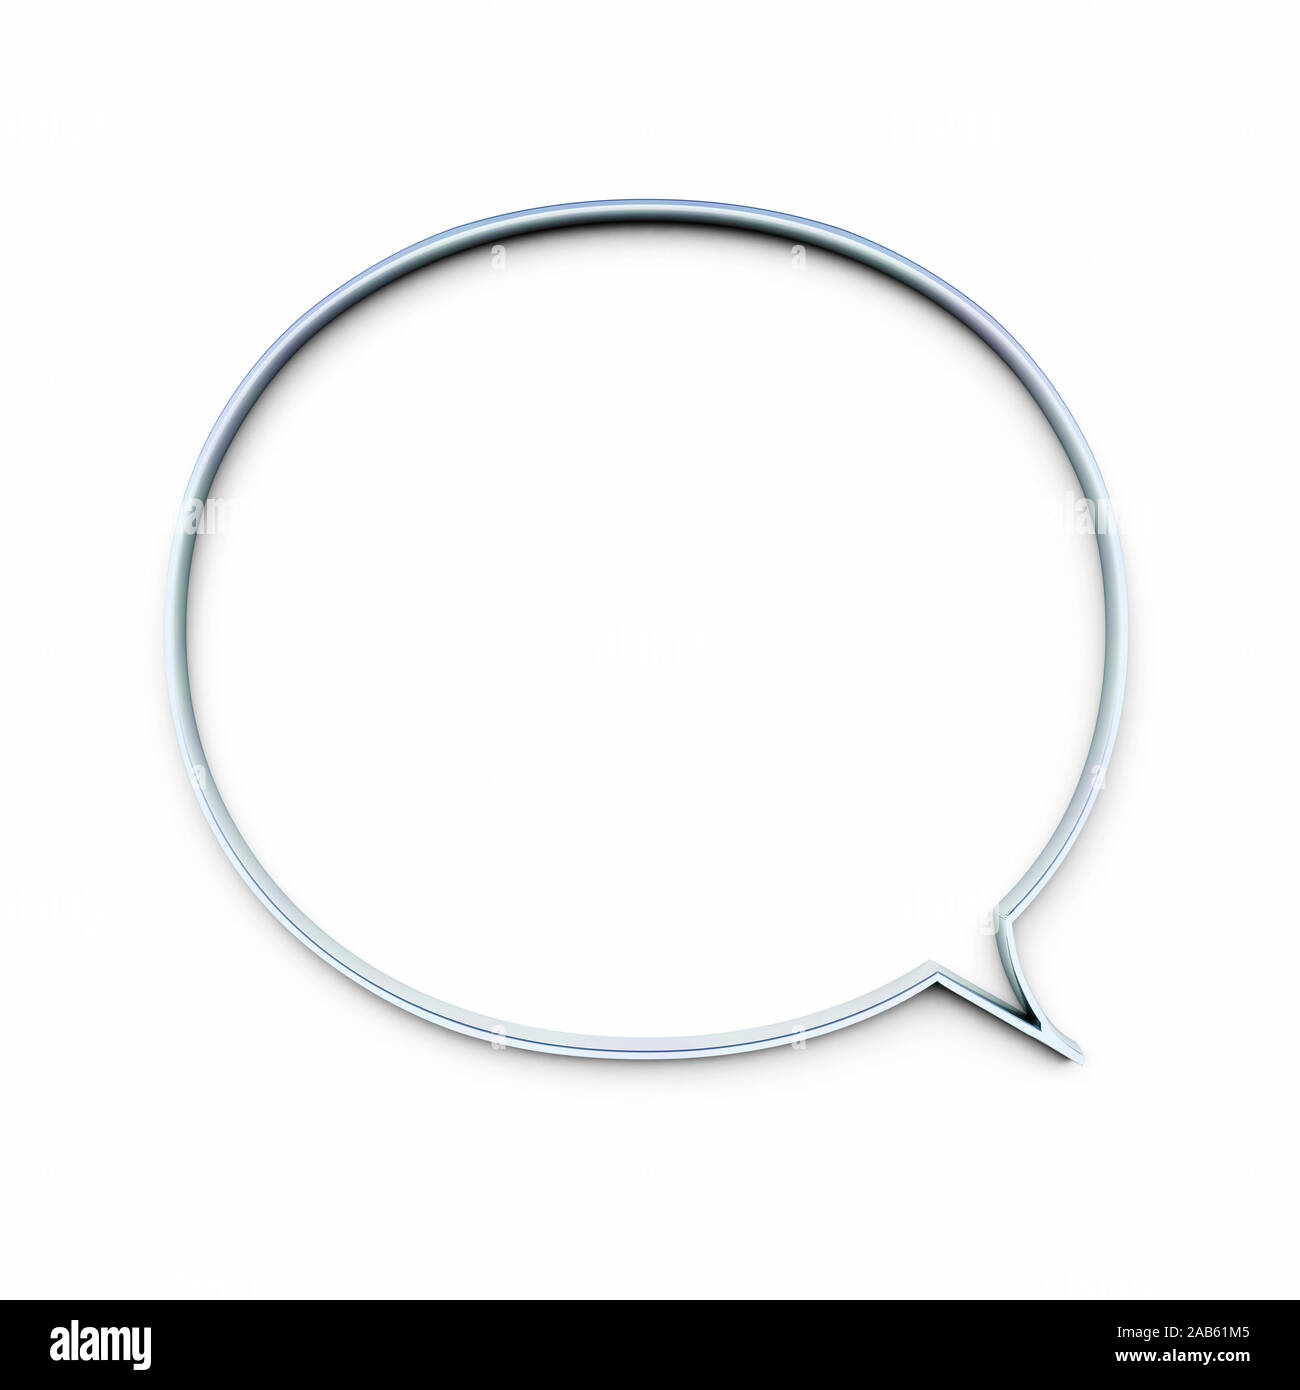 An illustration of a speech bubble in chrome Stock Photo